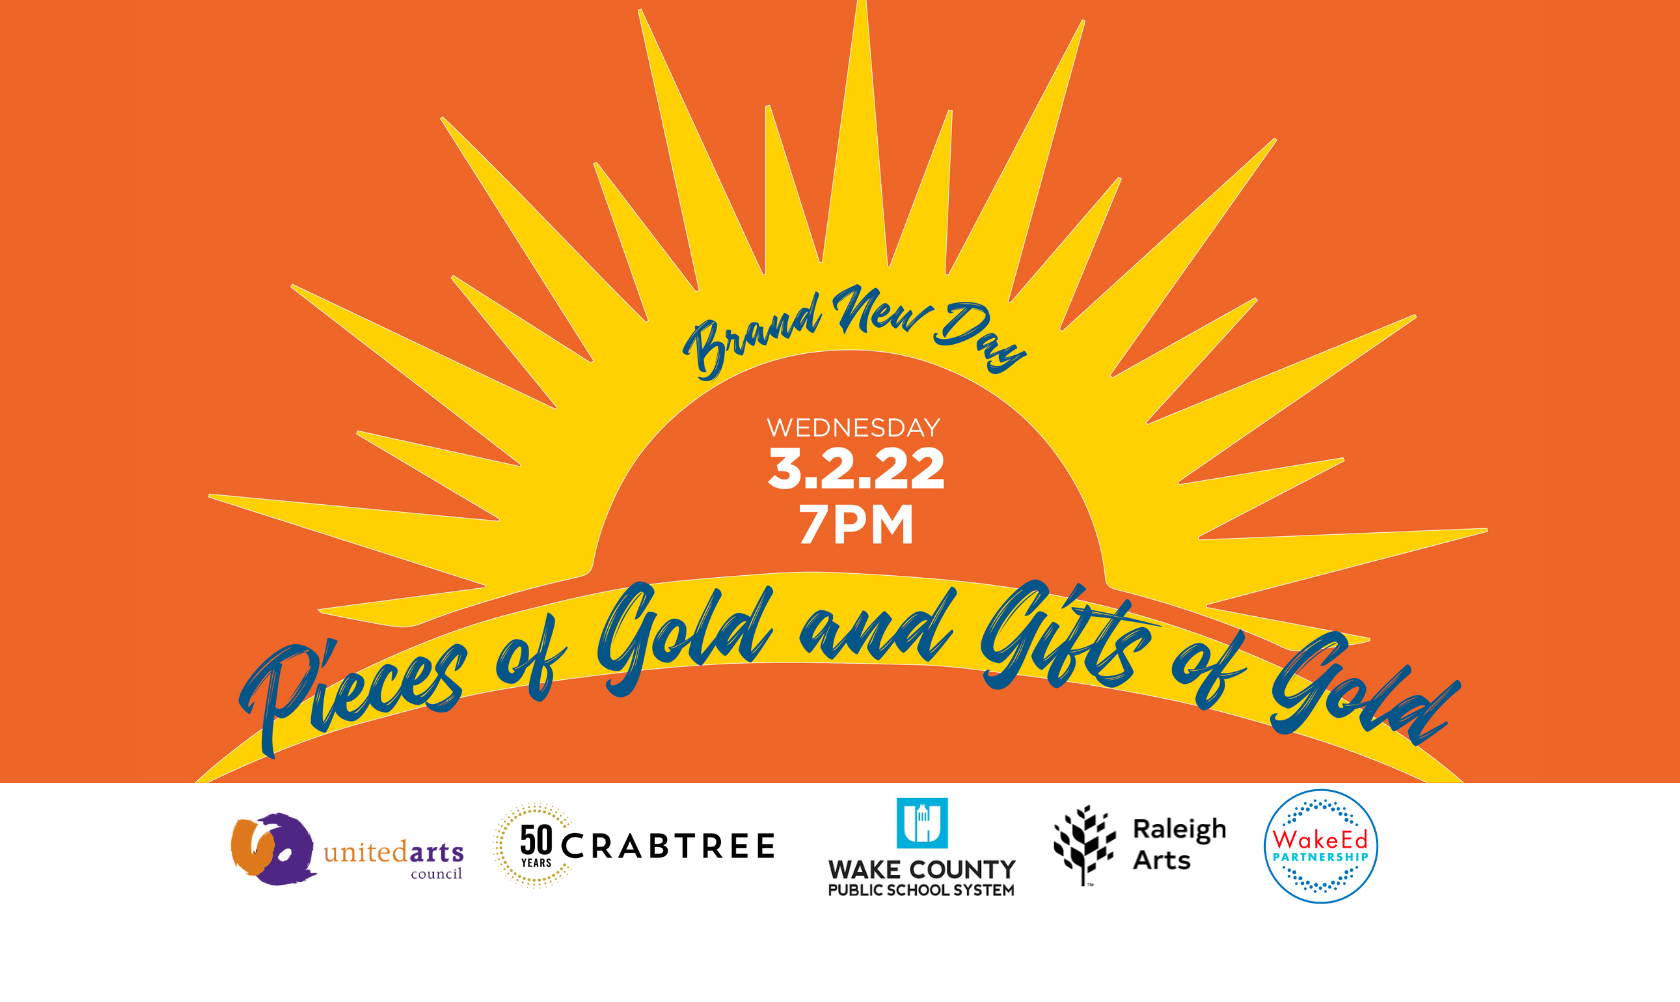 Pieces and Gifts of Gold March 2 at 7pm